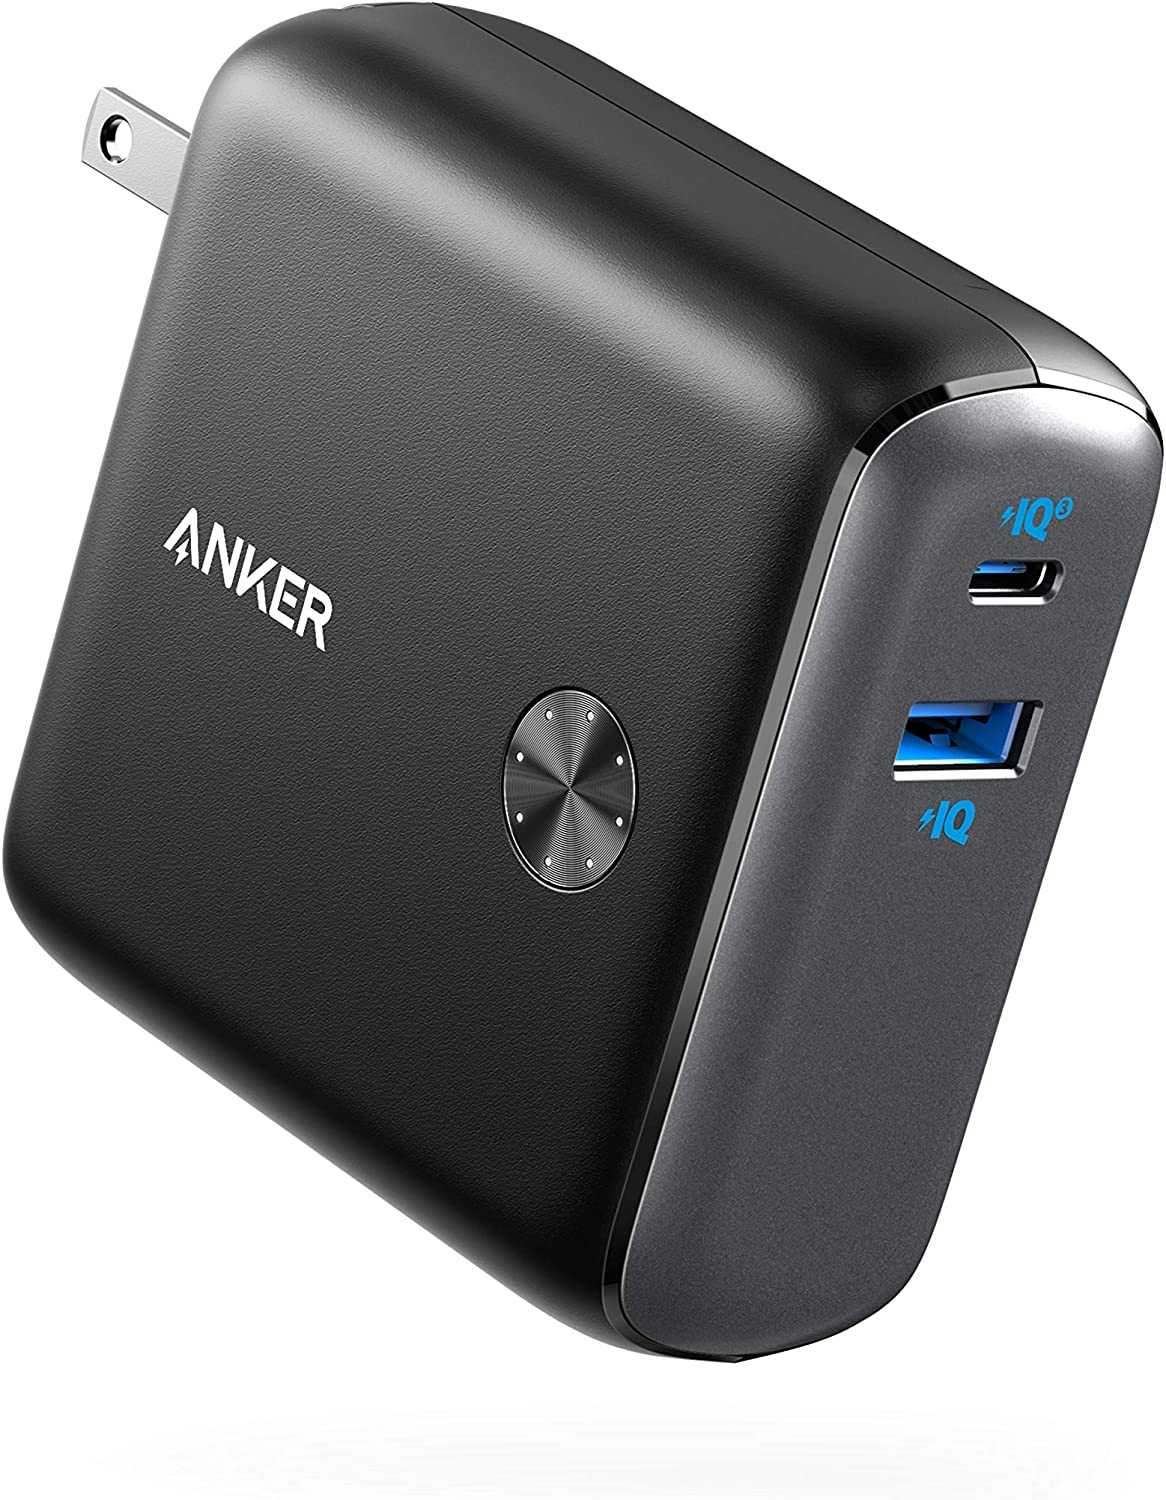 Anker PowerCore Fusion 10000, 20W USB-C Portable Charger 10000mAh 2-in-1 with Power Delivery Wall Charger for iPhone14/13/12 Series, iPad, Samsung, Pixel and More